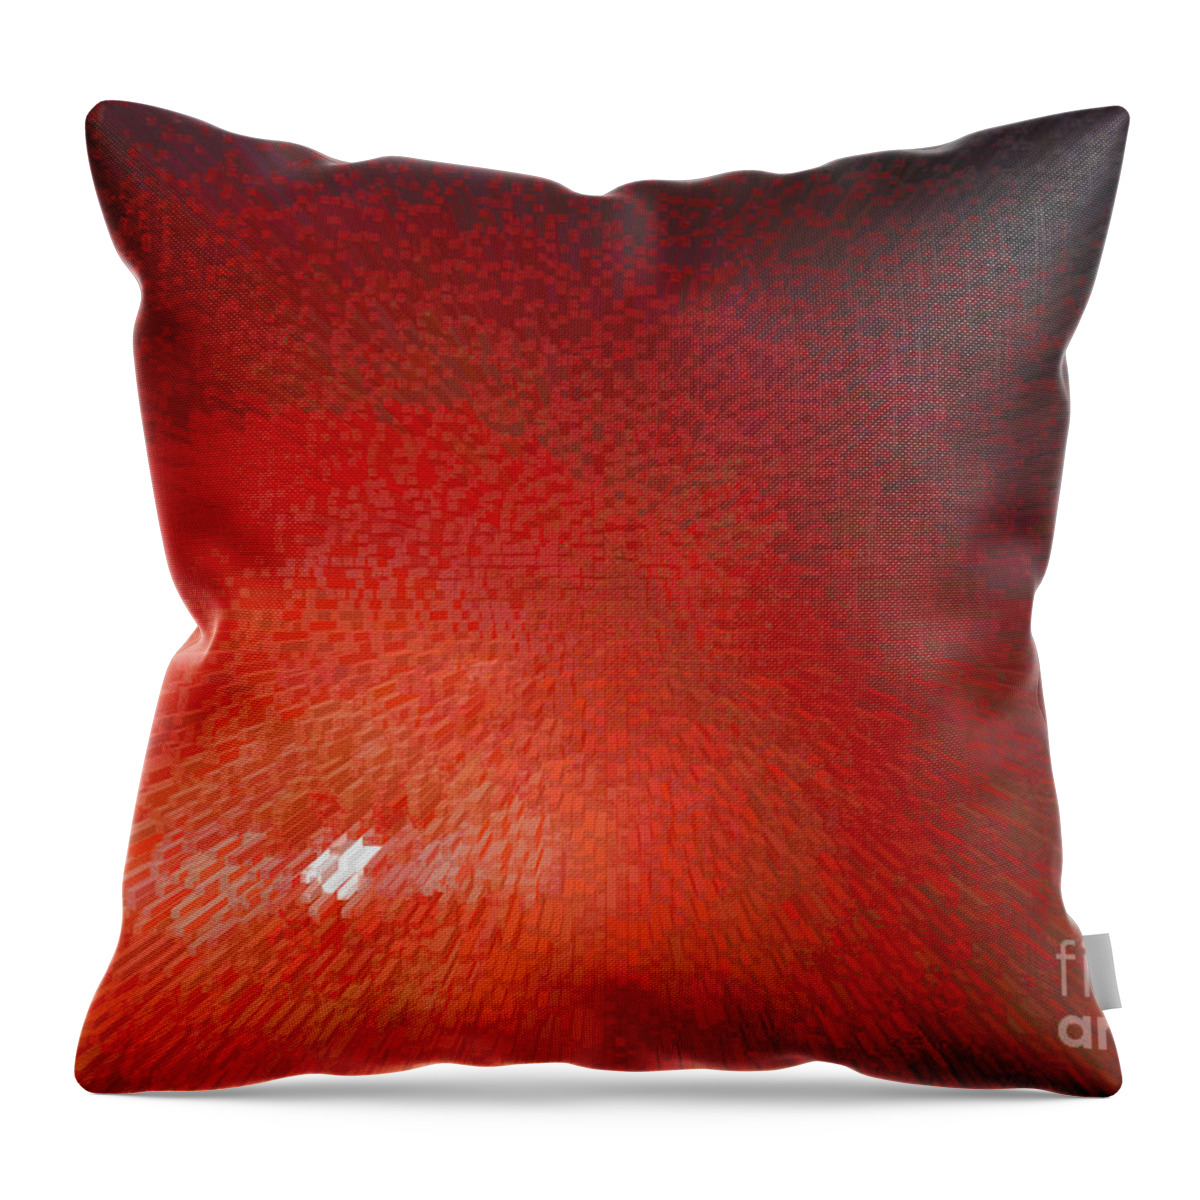 Digital Art Throw Pillow featuring the photograph Red Moon Rising by Alys Caviness-Gober